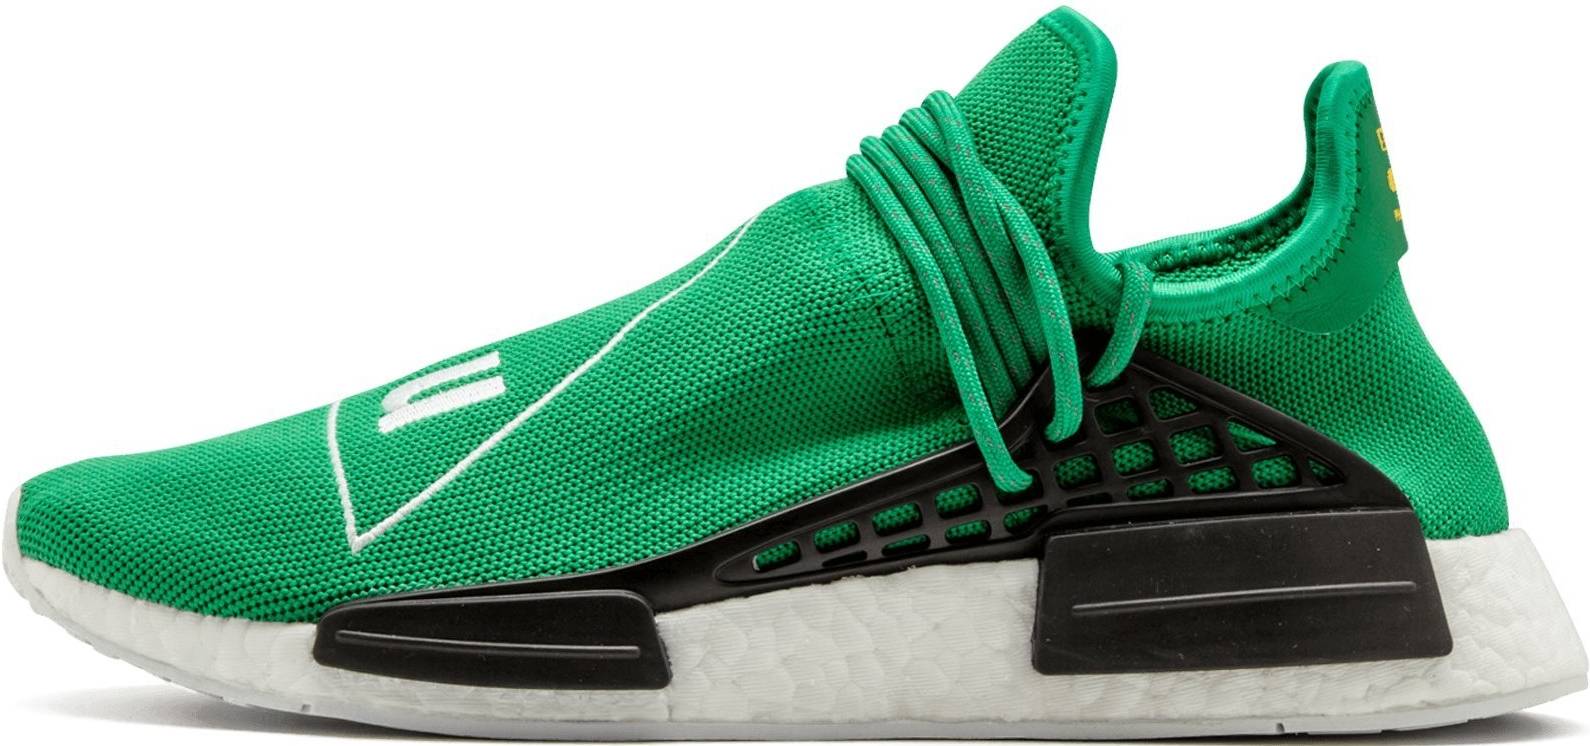 do pharrell nmd fit true to size